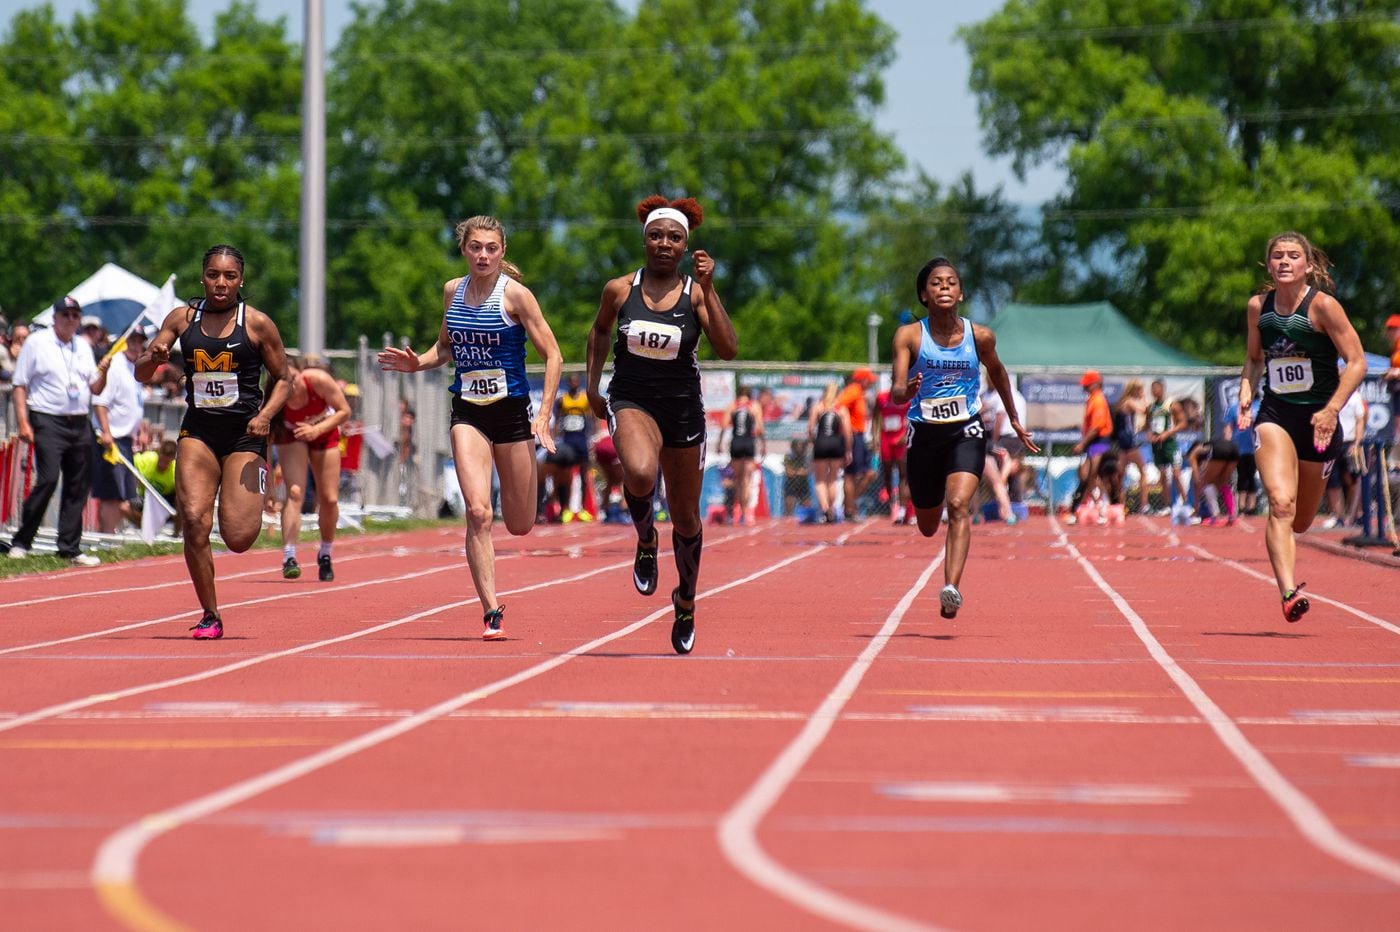 PIAA state track and field championships Full results from Saturday’s